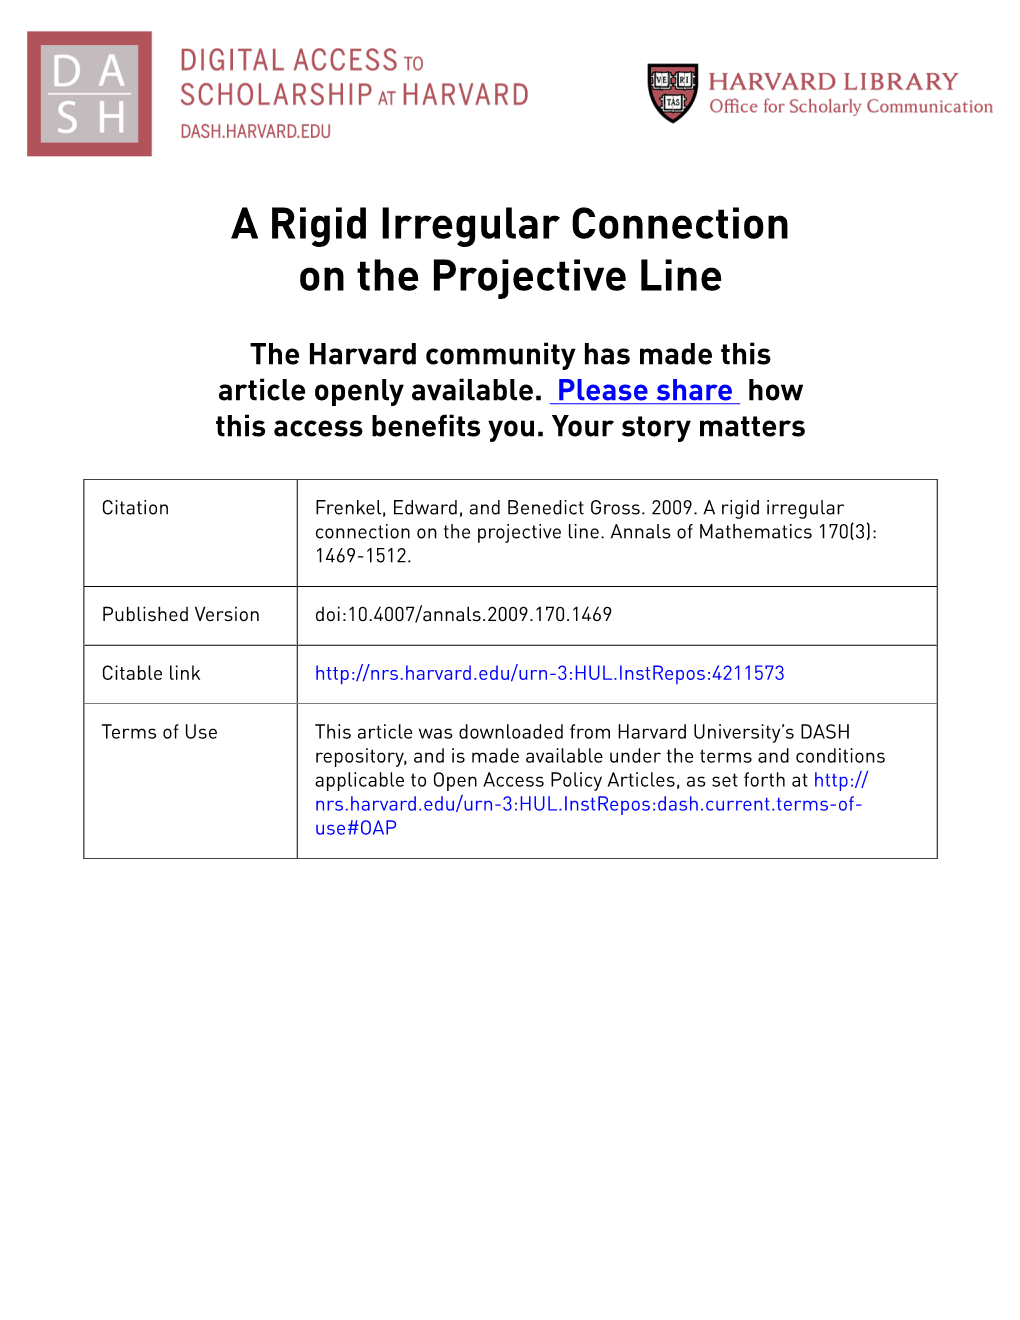 A Rigid Irregular Connection on the Projective Line